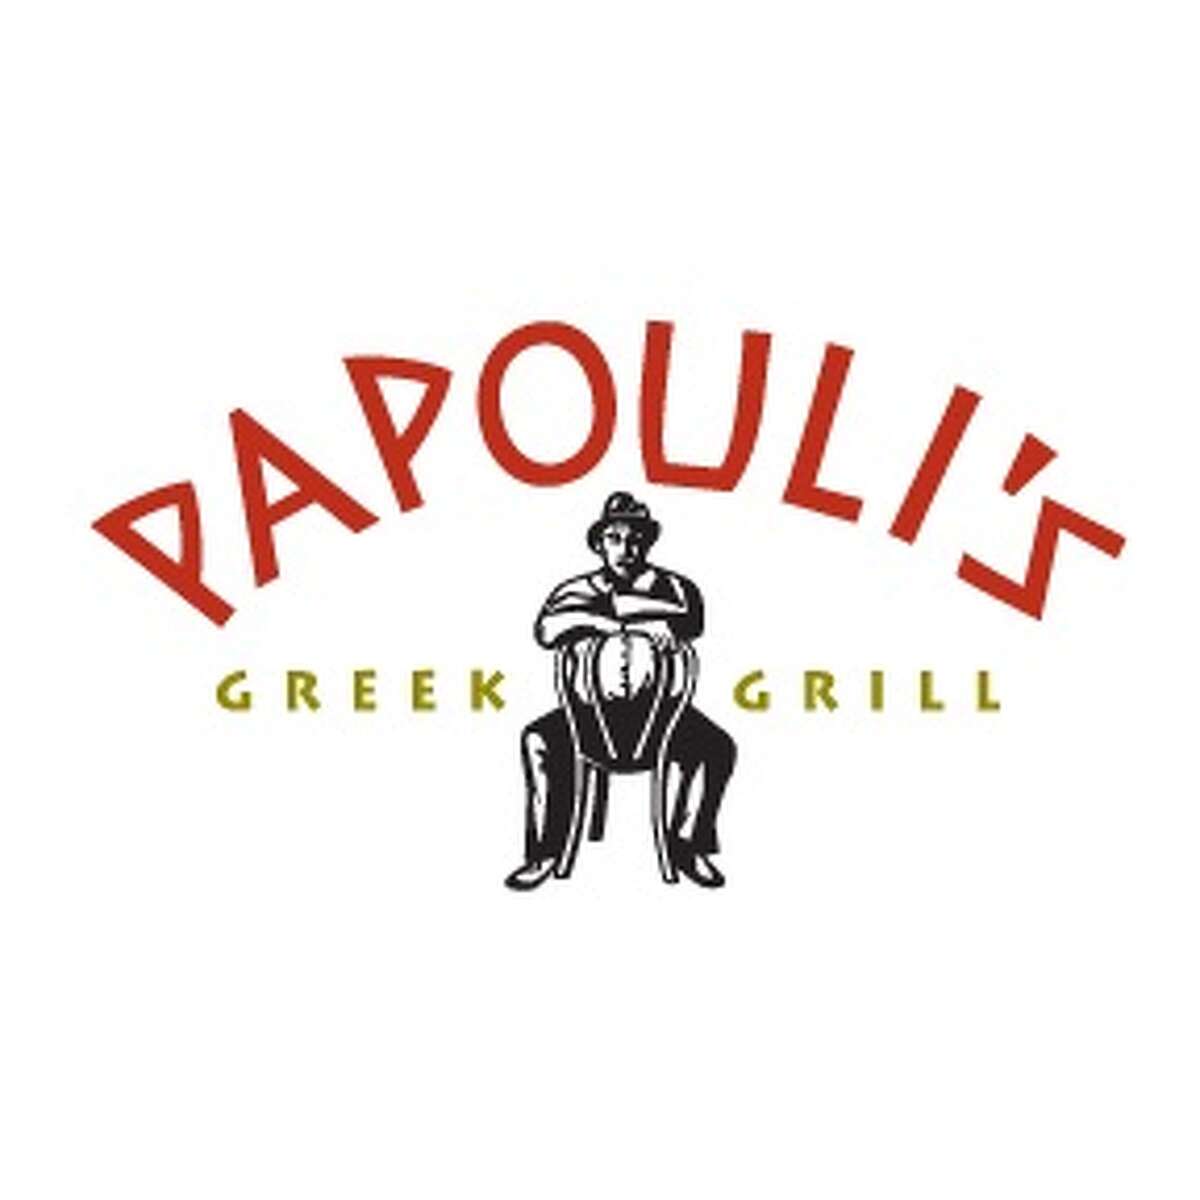 Papouli's Cowboy Pita Sandwich Deal includes a pita sandwich with a choice of gyro meat or grilled chicken served with seasoned fries and a fountain drink, for $7.99.Keep clicking to see 22 San Antonio sandwiches you need to try right now.